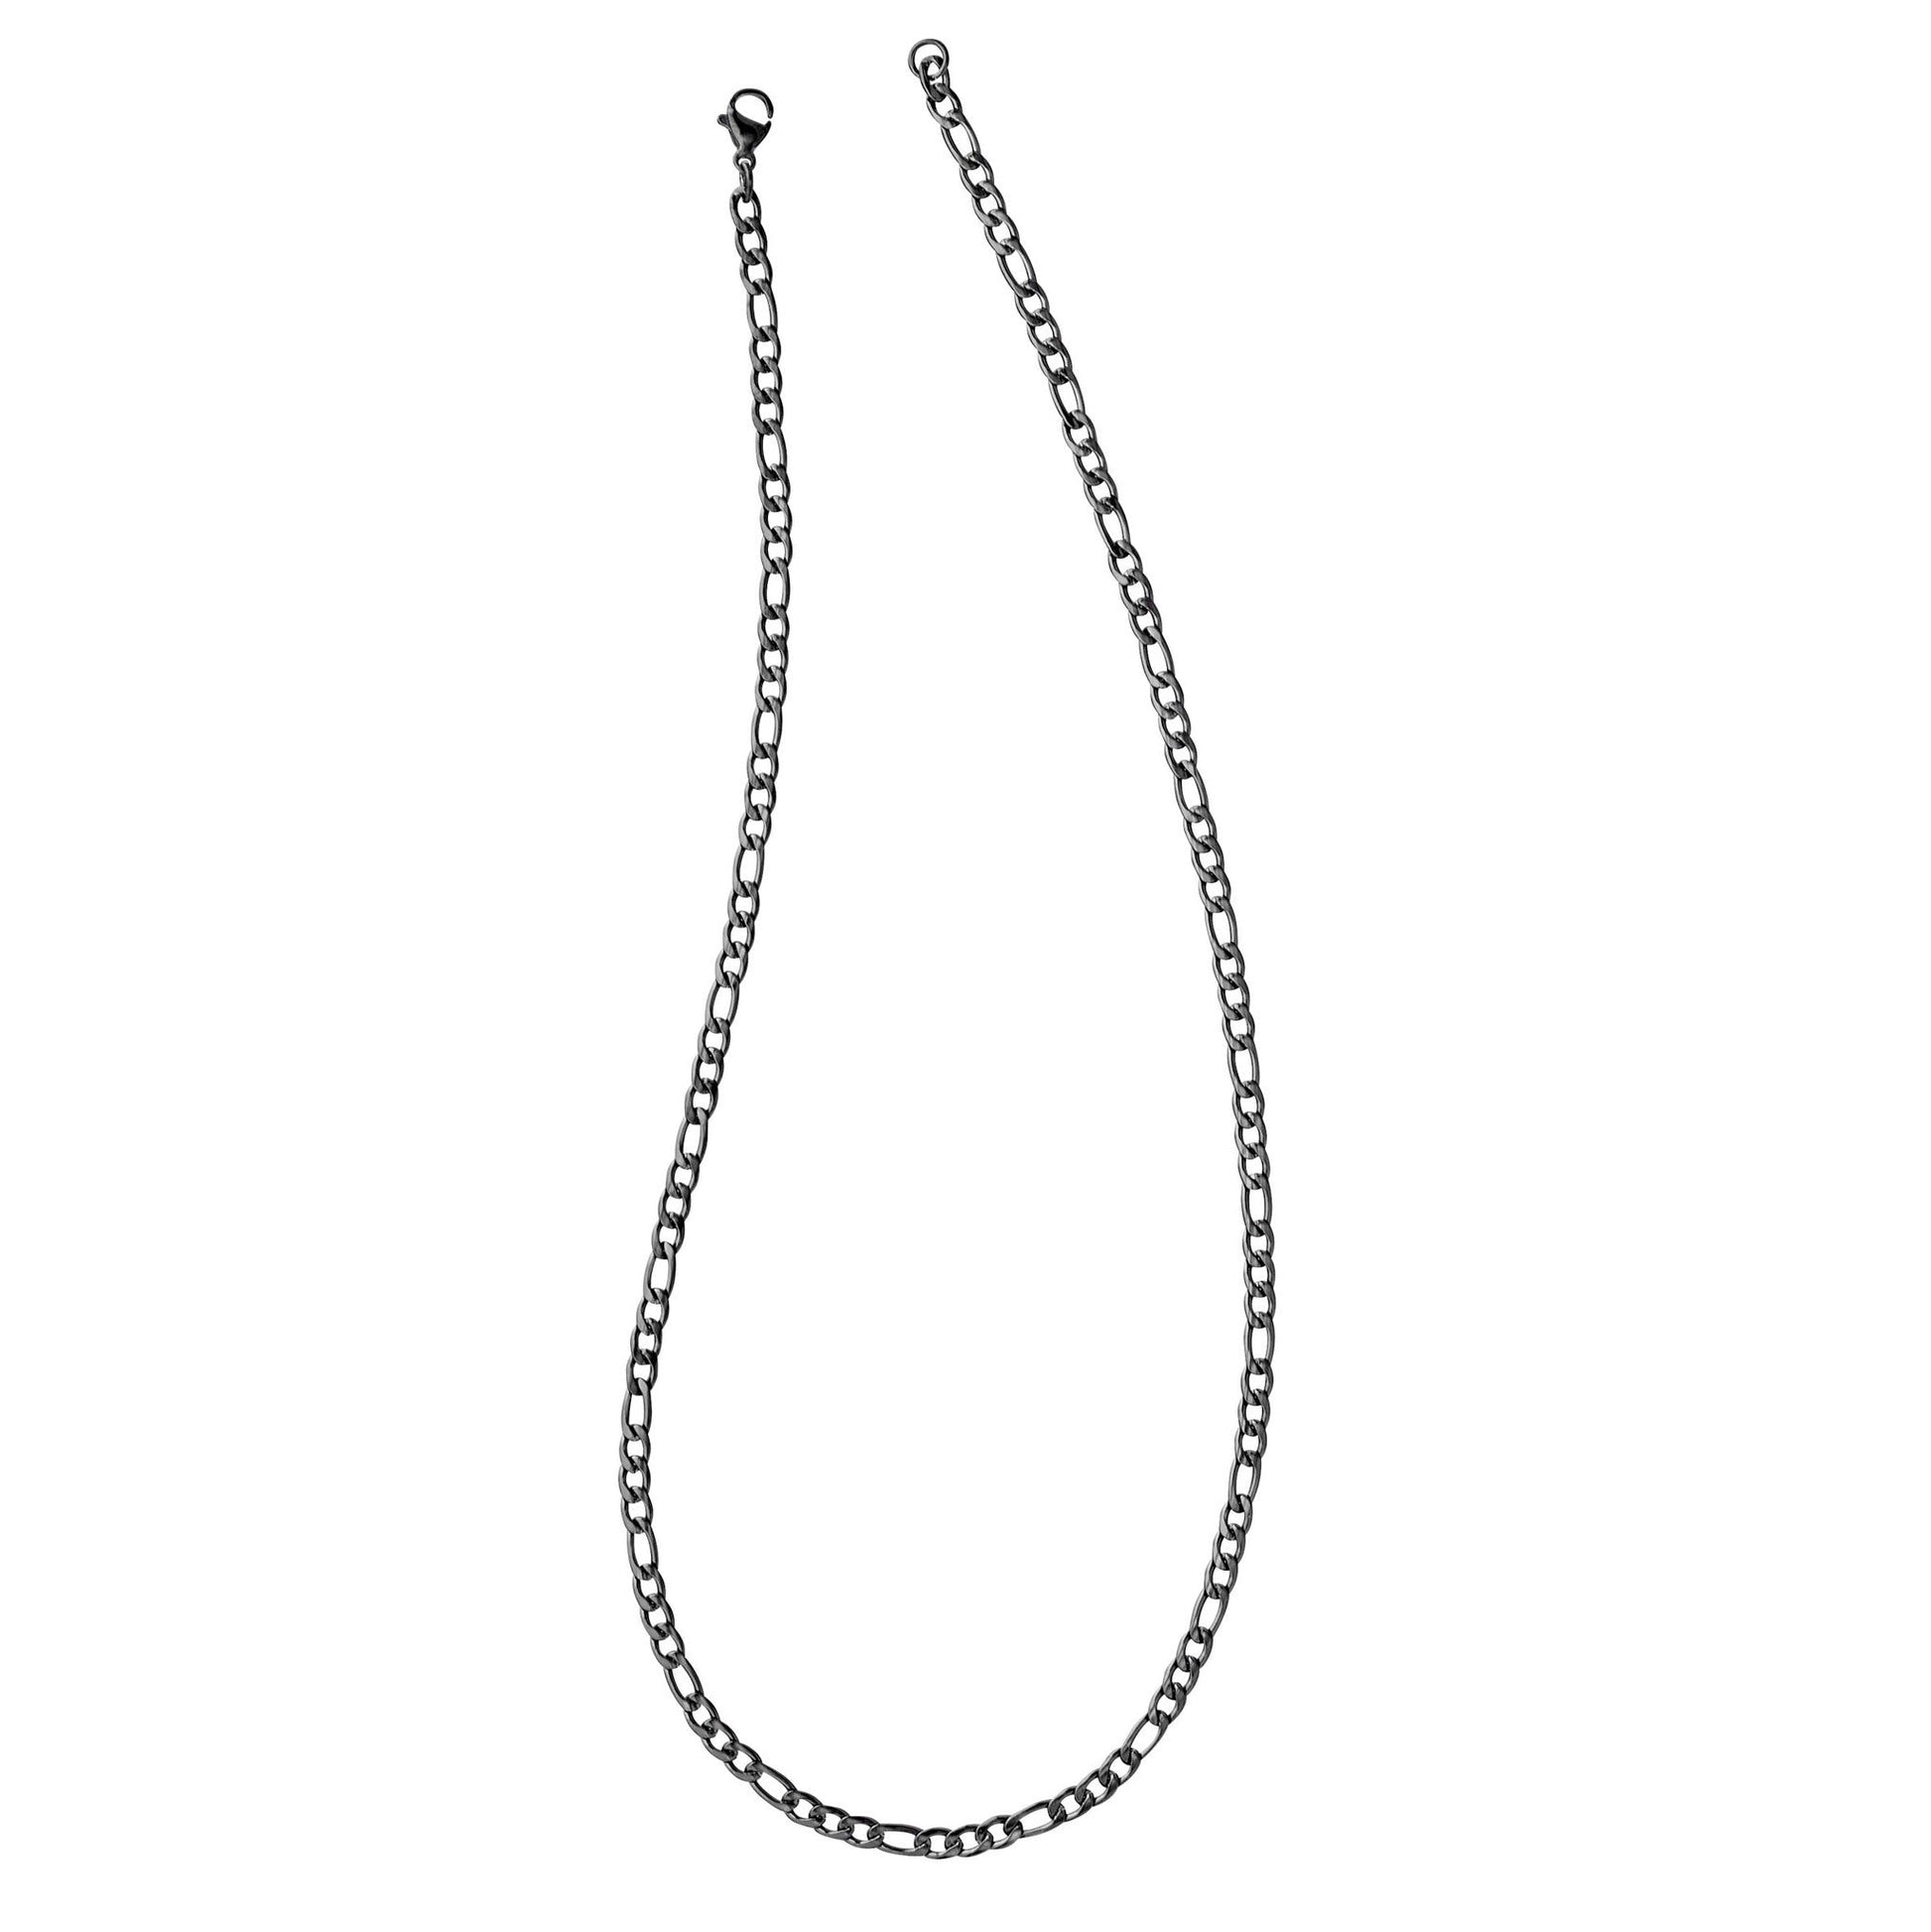 A 18" stainless steel gold plated figaro chain displayed on a neutral white background.